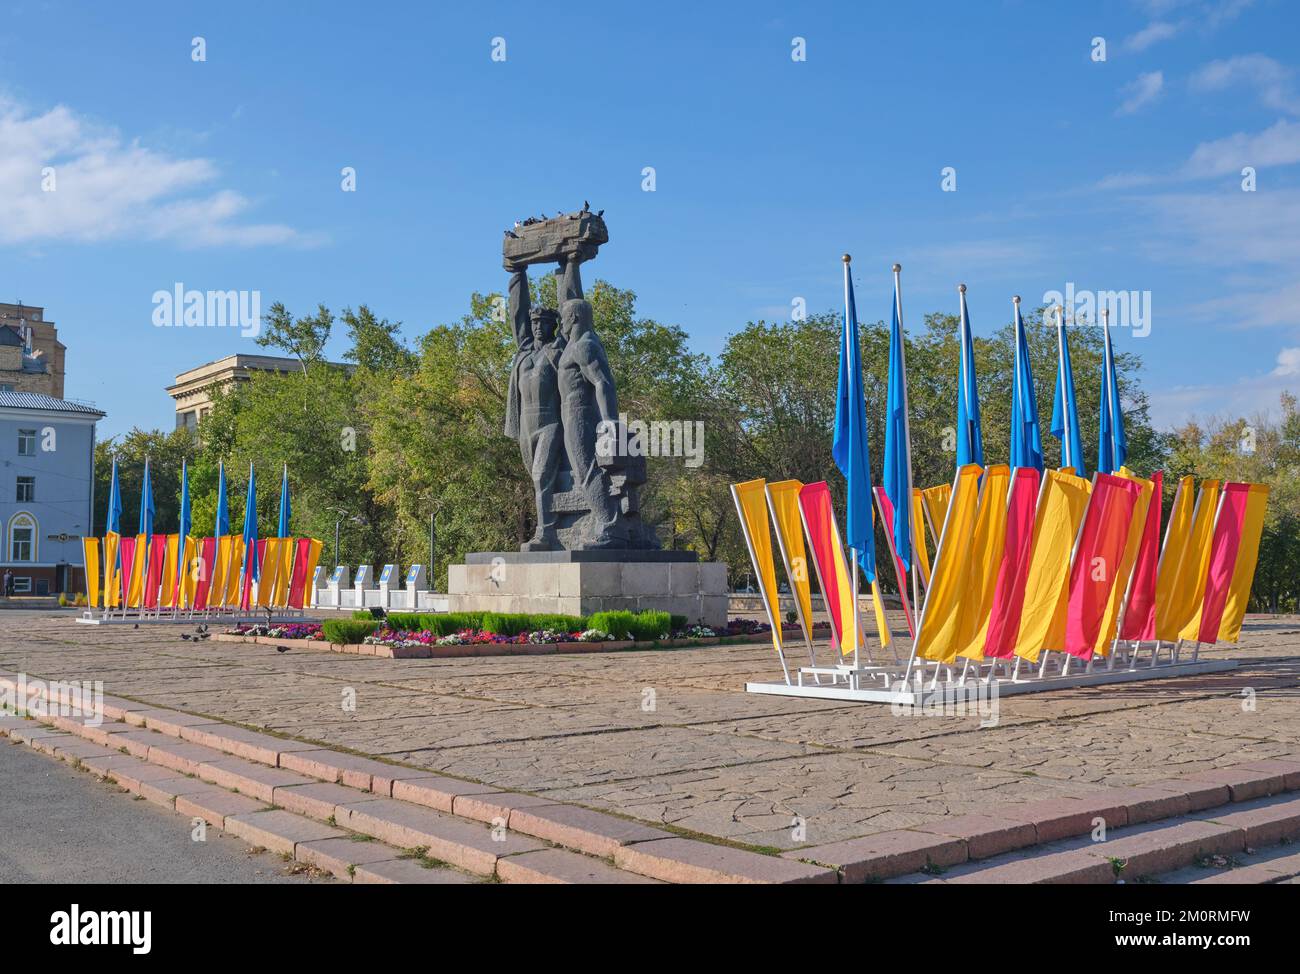 The landmark Miner's Glory monument, honoring all of the area workers who have worked in the coal, ore mines. The colorful flags are for the miner's d Stock Photo